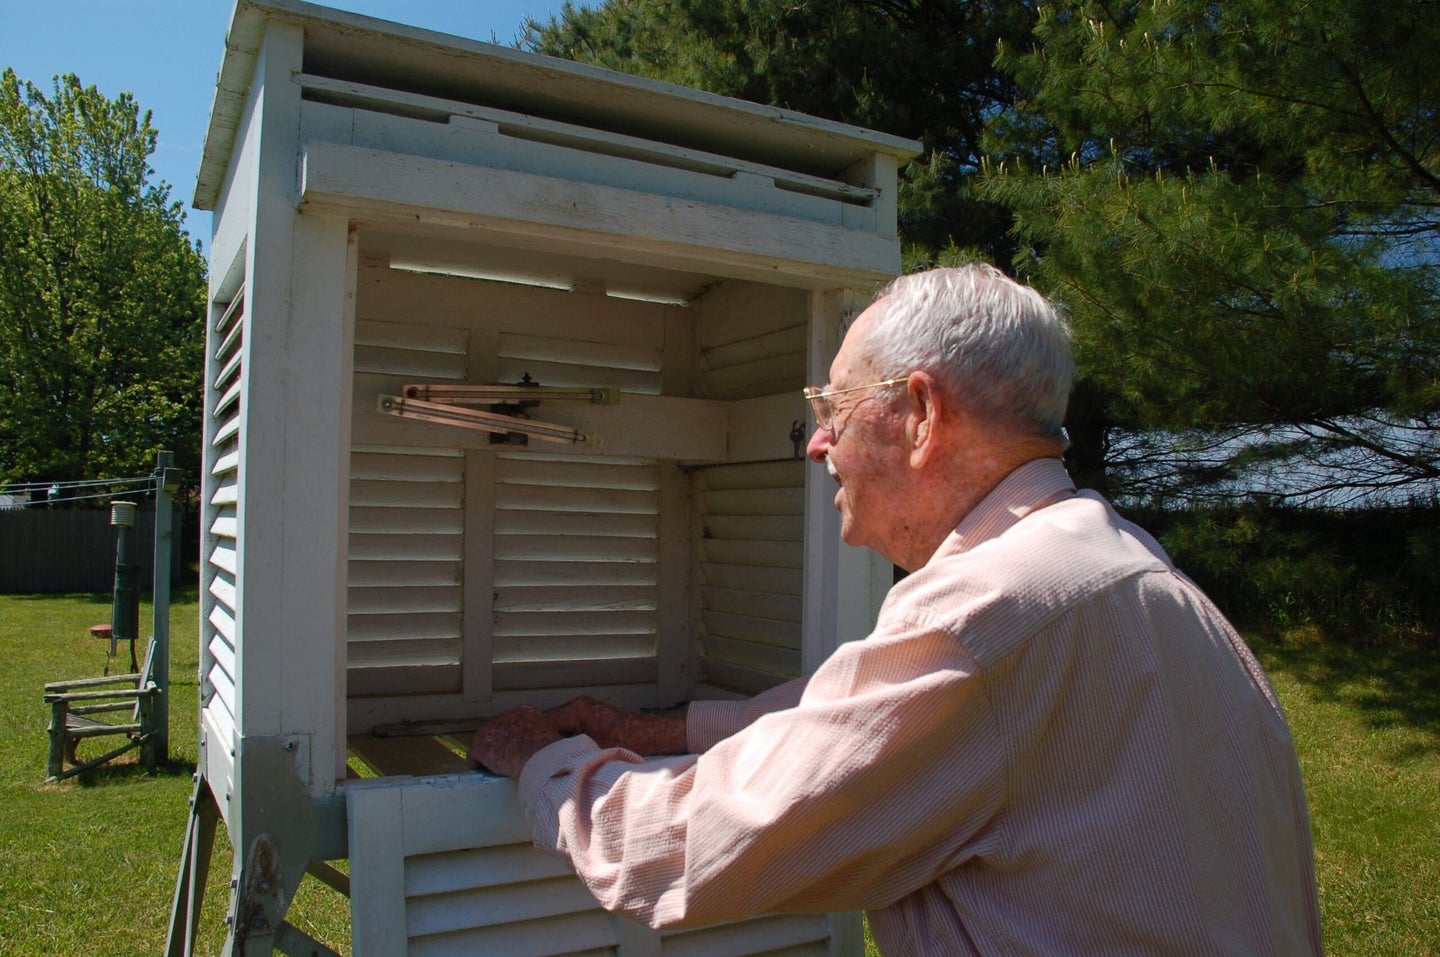 101-Year-Old Citizen Scientist Has Called In Weather Observations Every Day For 84 Years